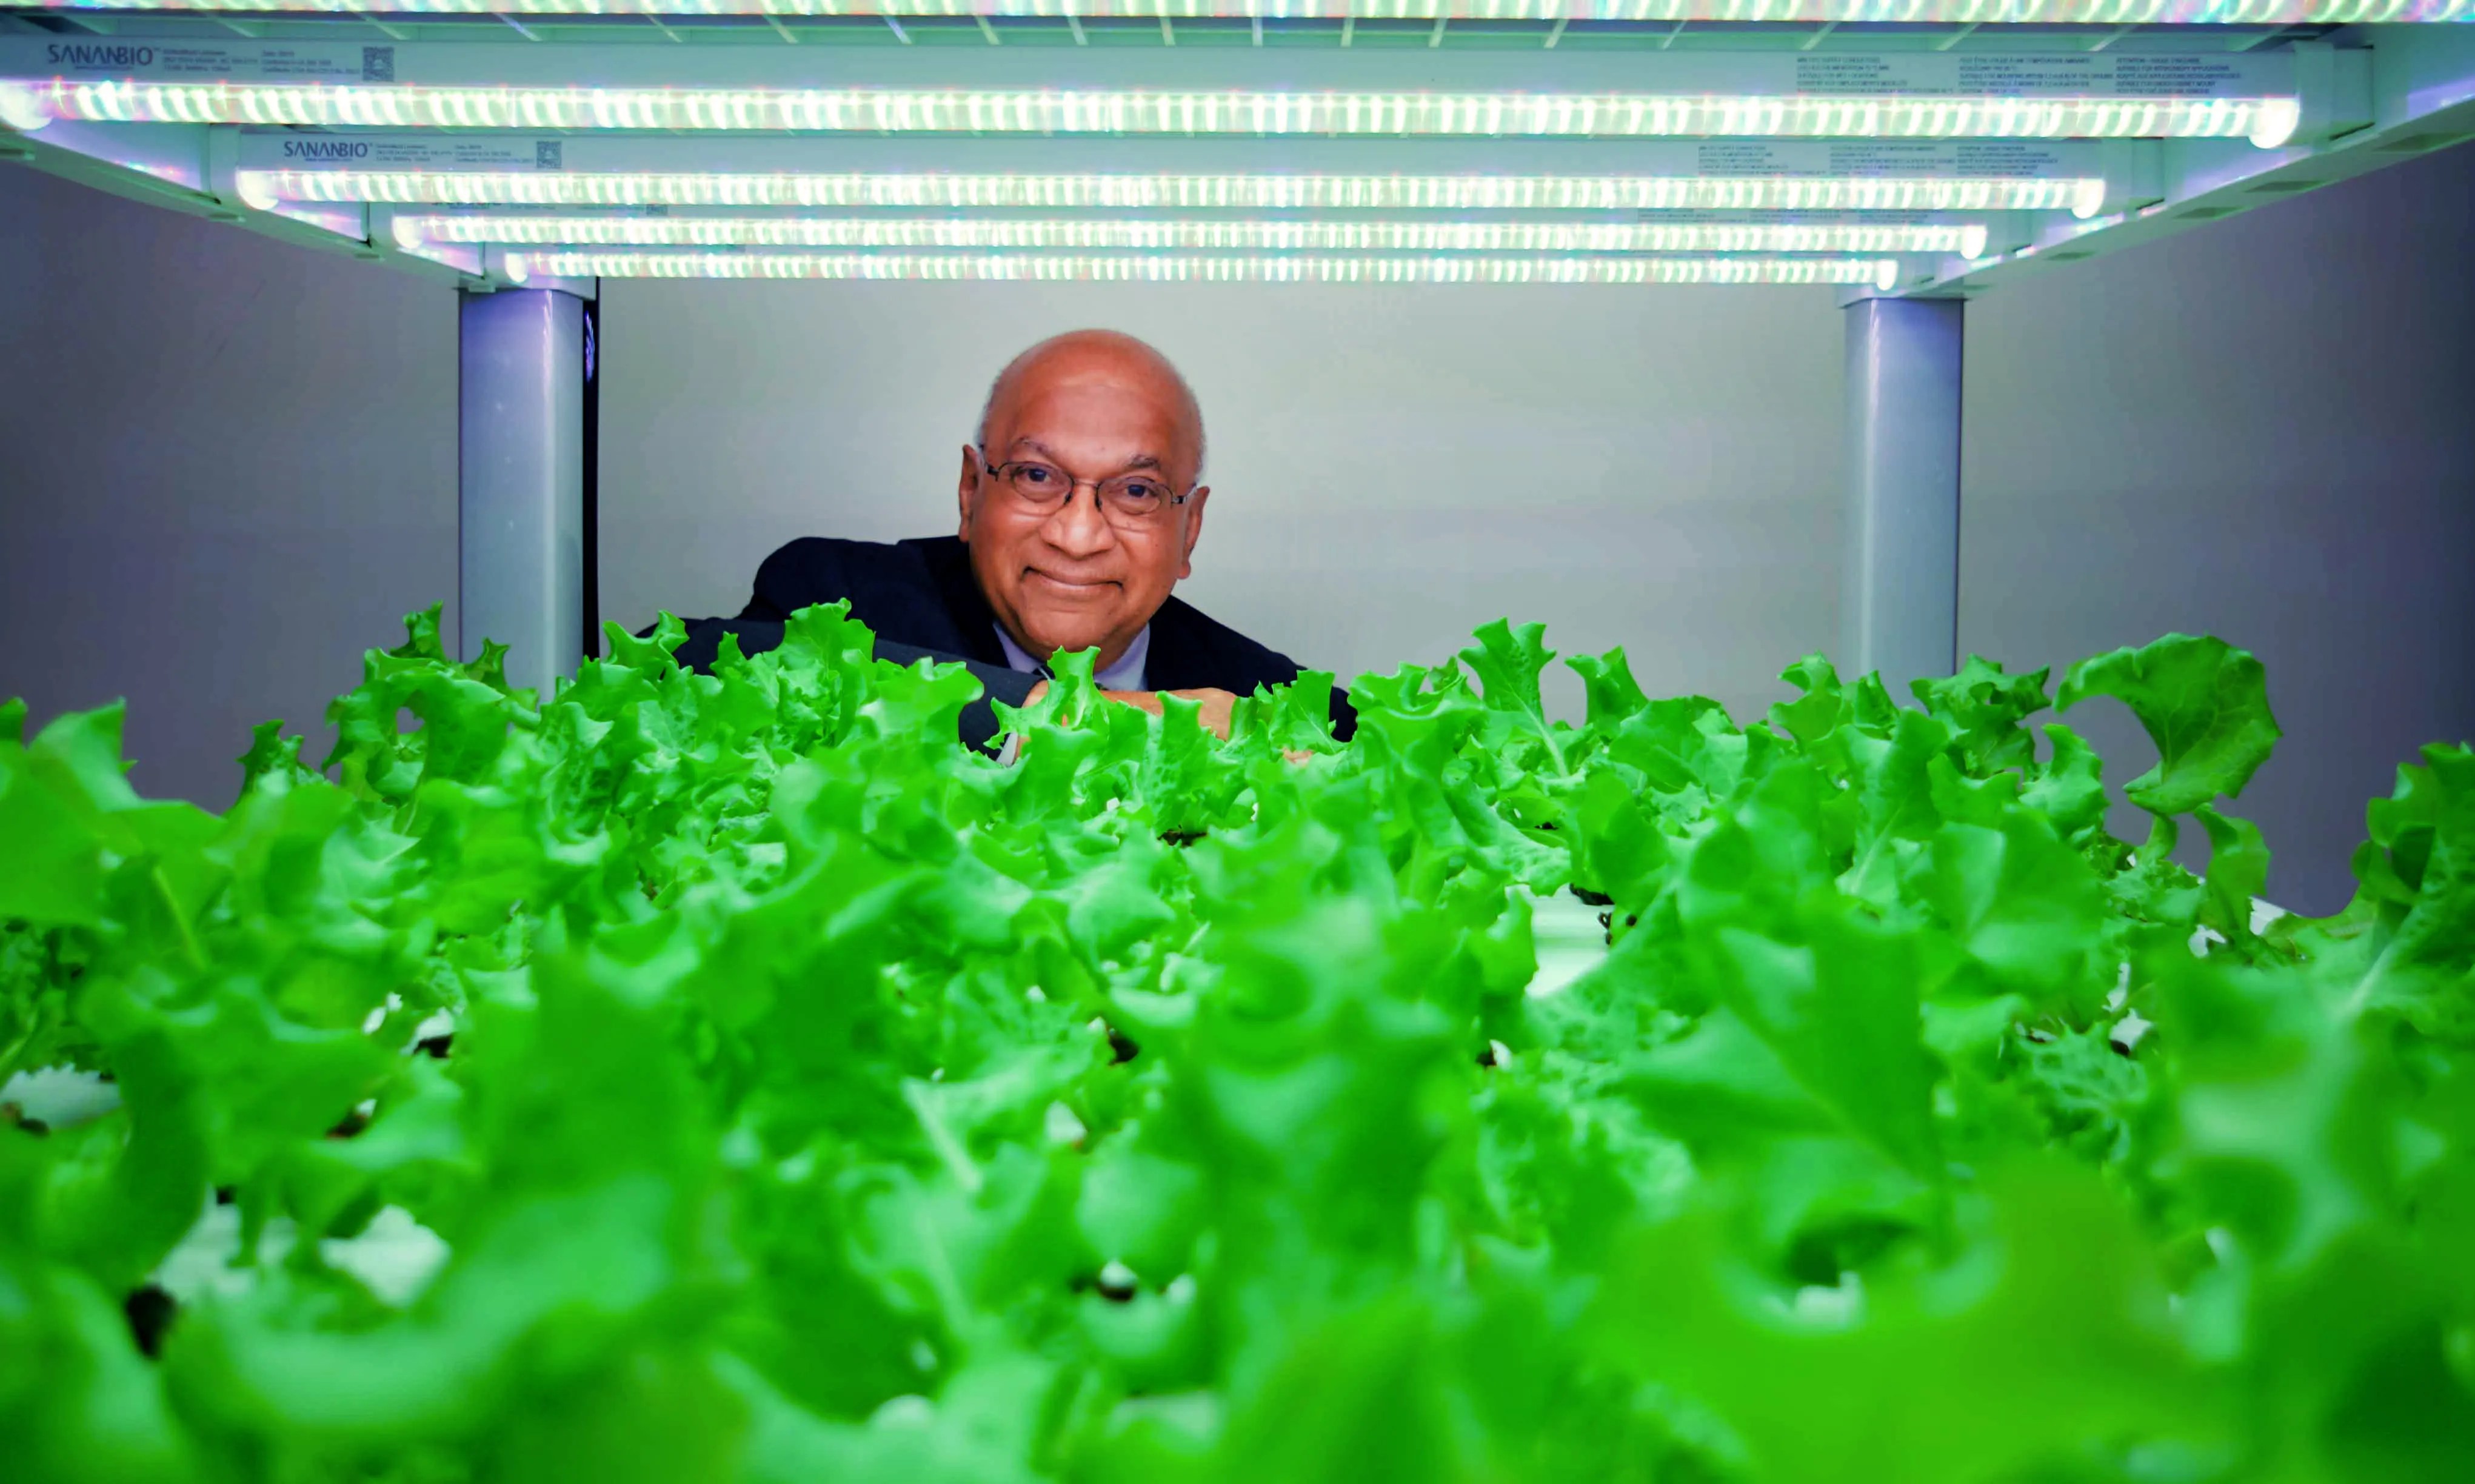 Ajit George of Second Chances Farm looks out over fresh lettuce growing in a vertical garden prototype. He wants to build a vertical indoor farm in Wilmington's Riverside neighborhood to grow fresh food for the neighborhood and employ ex-offenders.